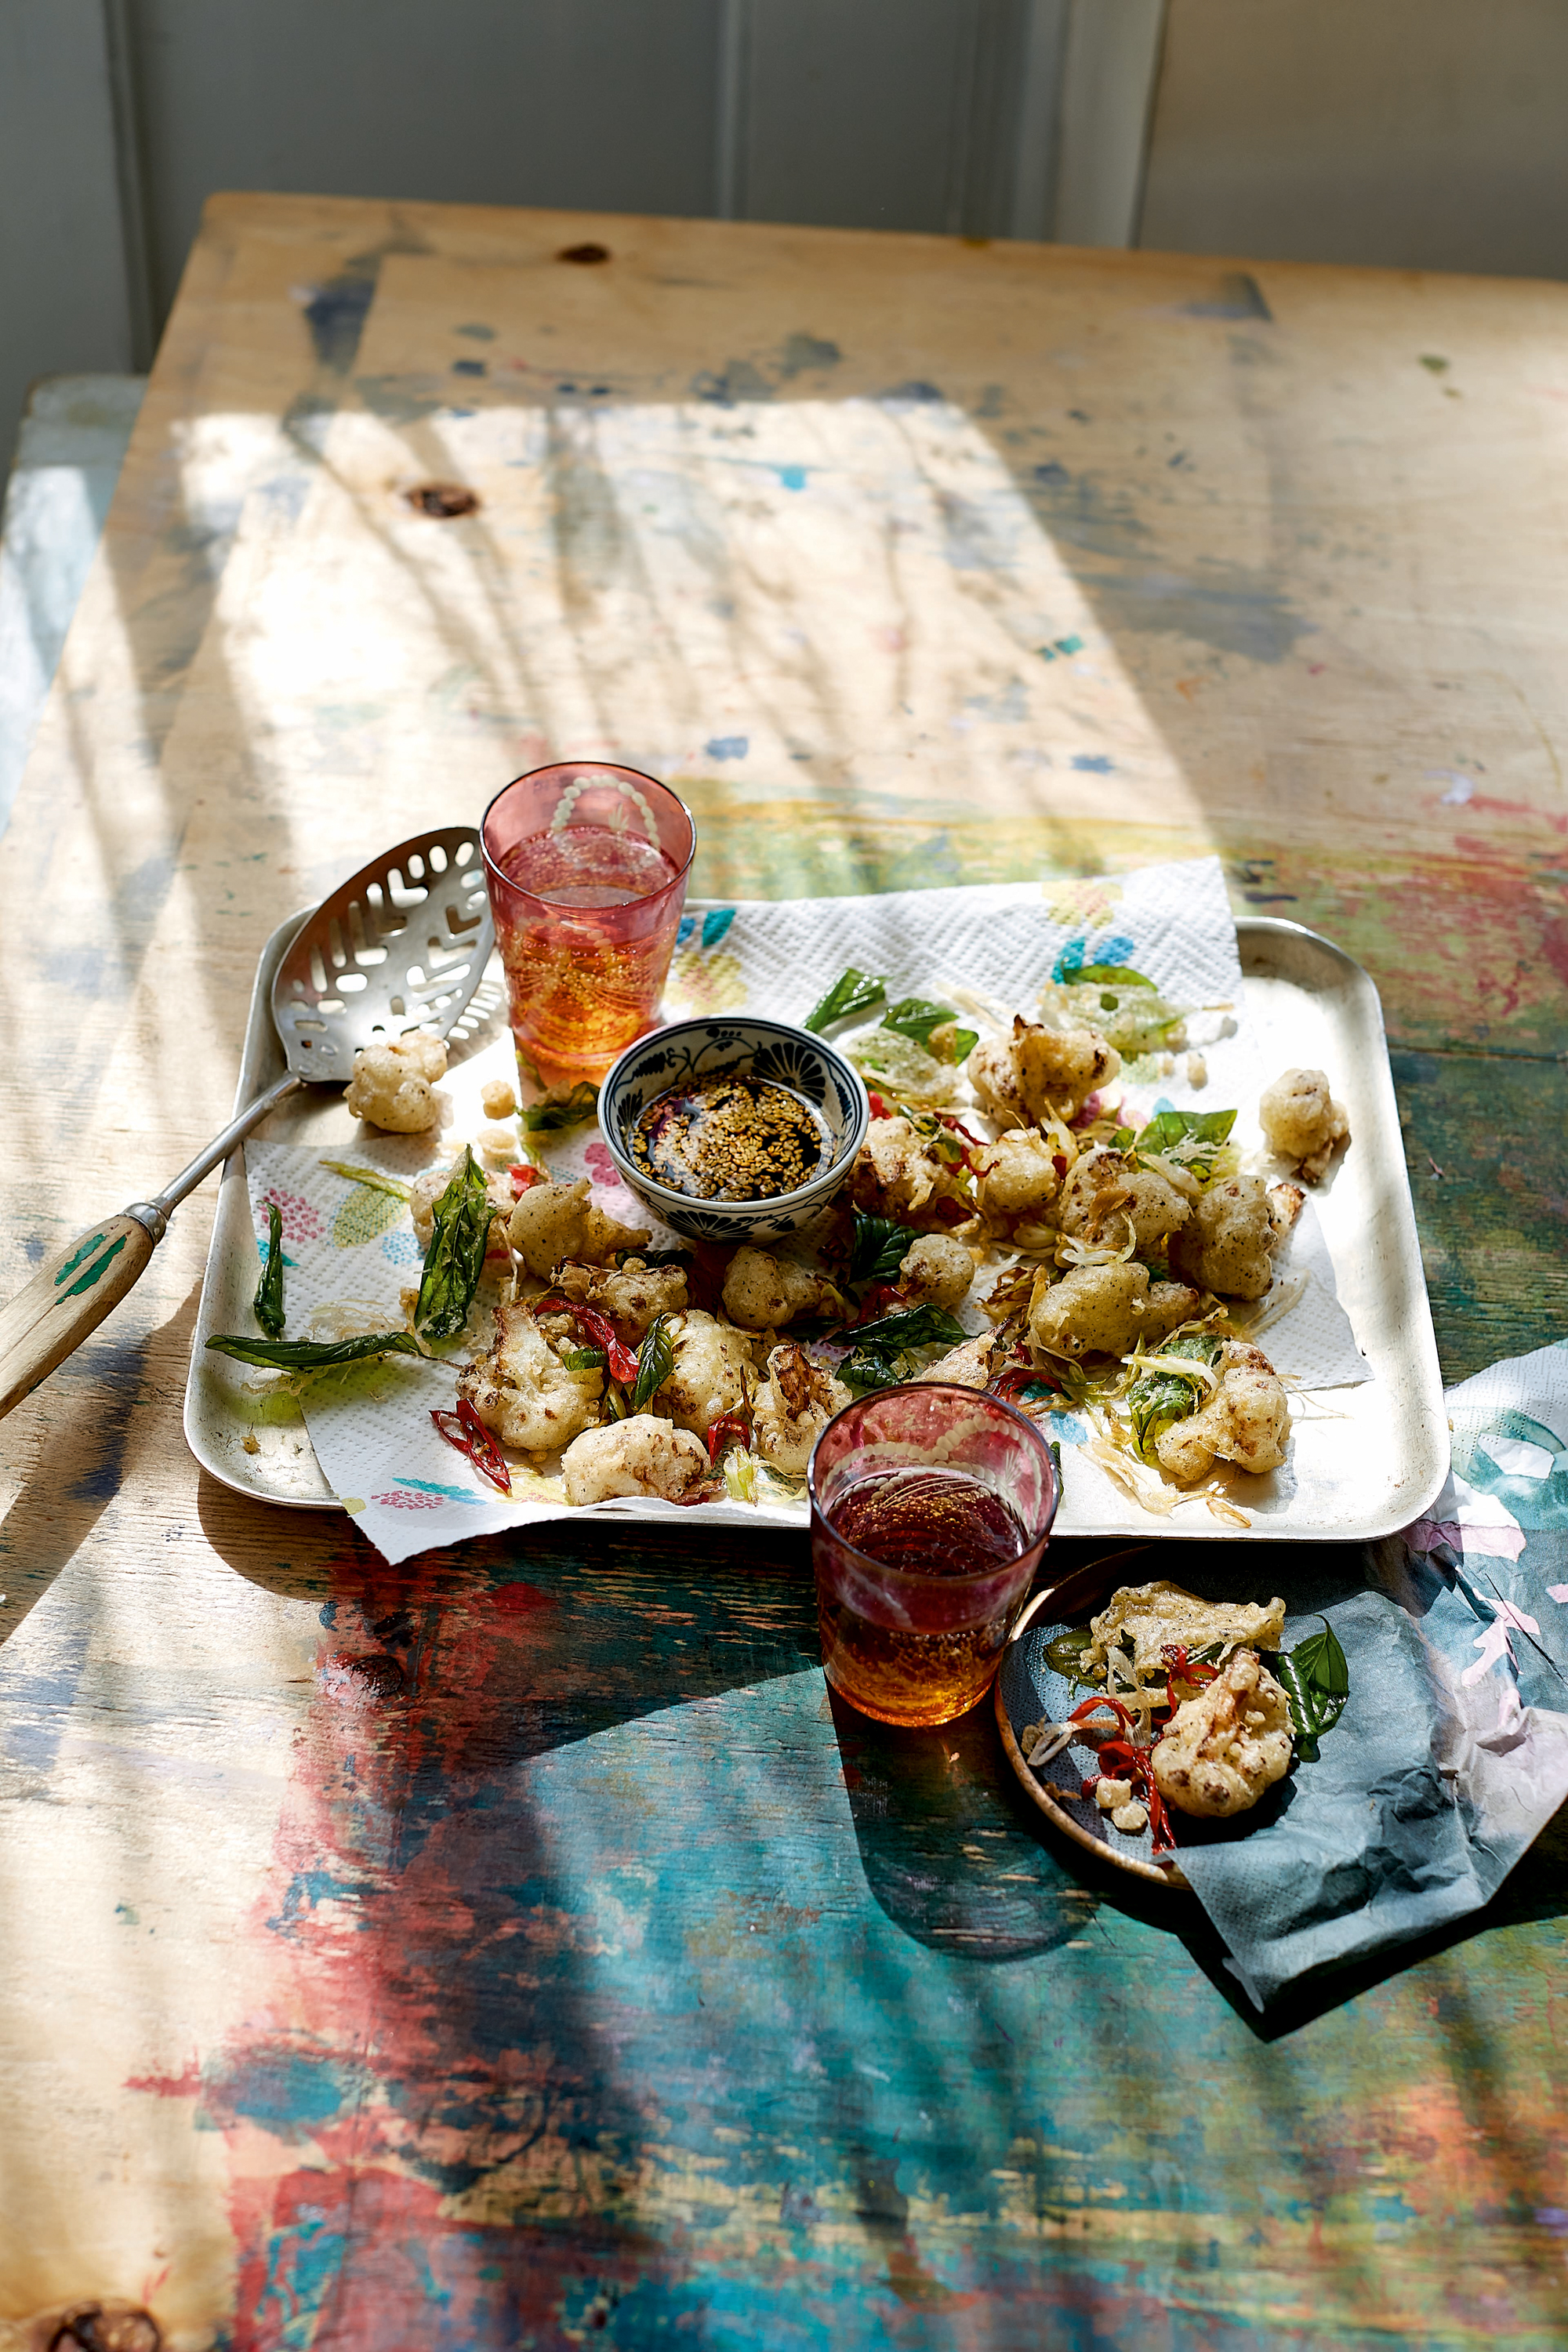 Cauliflower popcorn from Jikoni: Proudly Inauthentic Recipes from an Immigrant Kitchen by Ravinder Bhogal (Kristin Perers/PA)